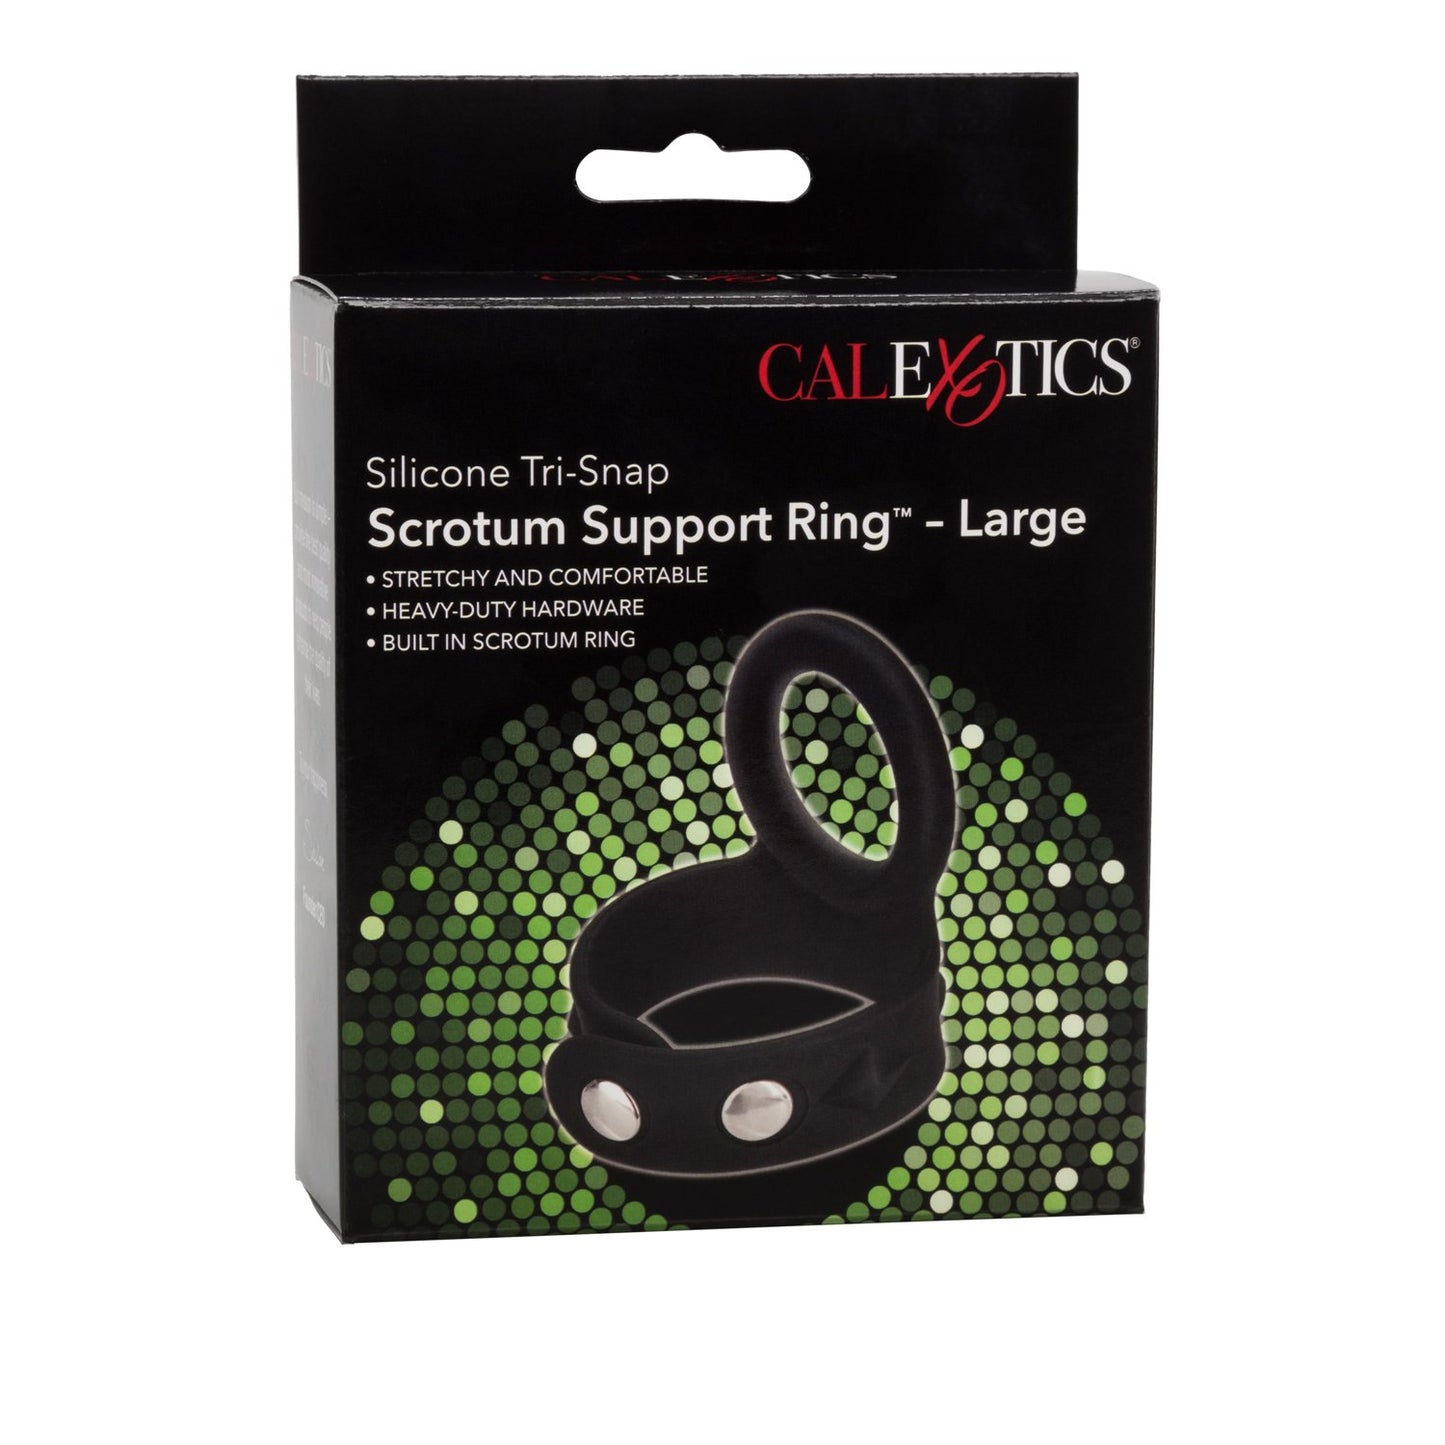 Silicone Tri-Snap Scrotum Support Ring - Large